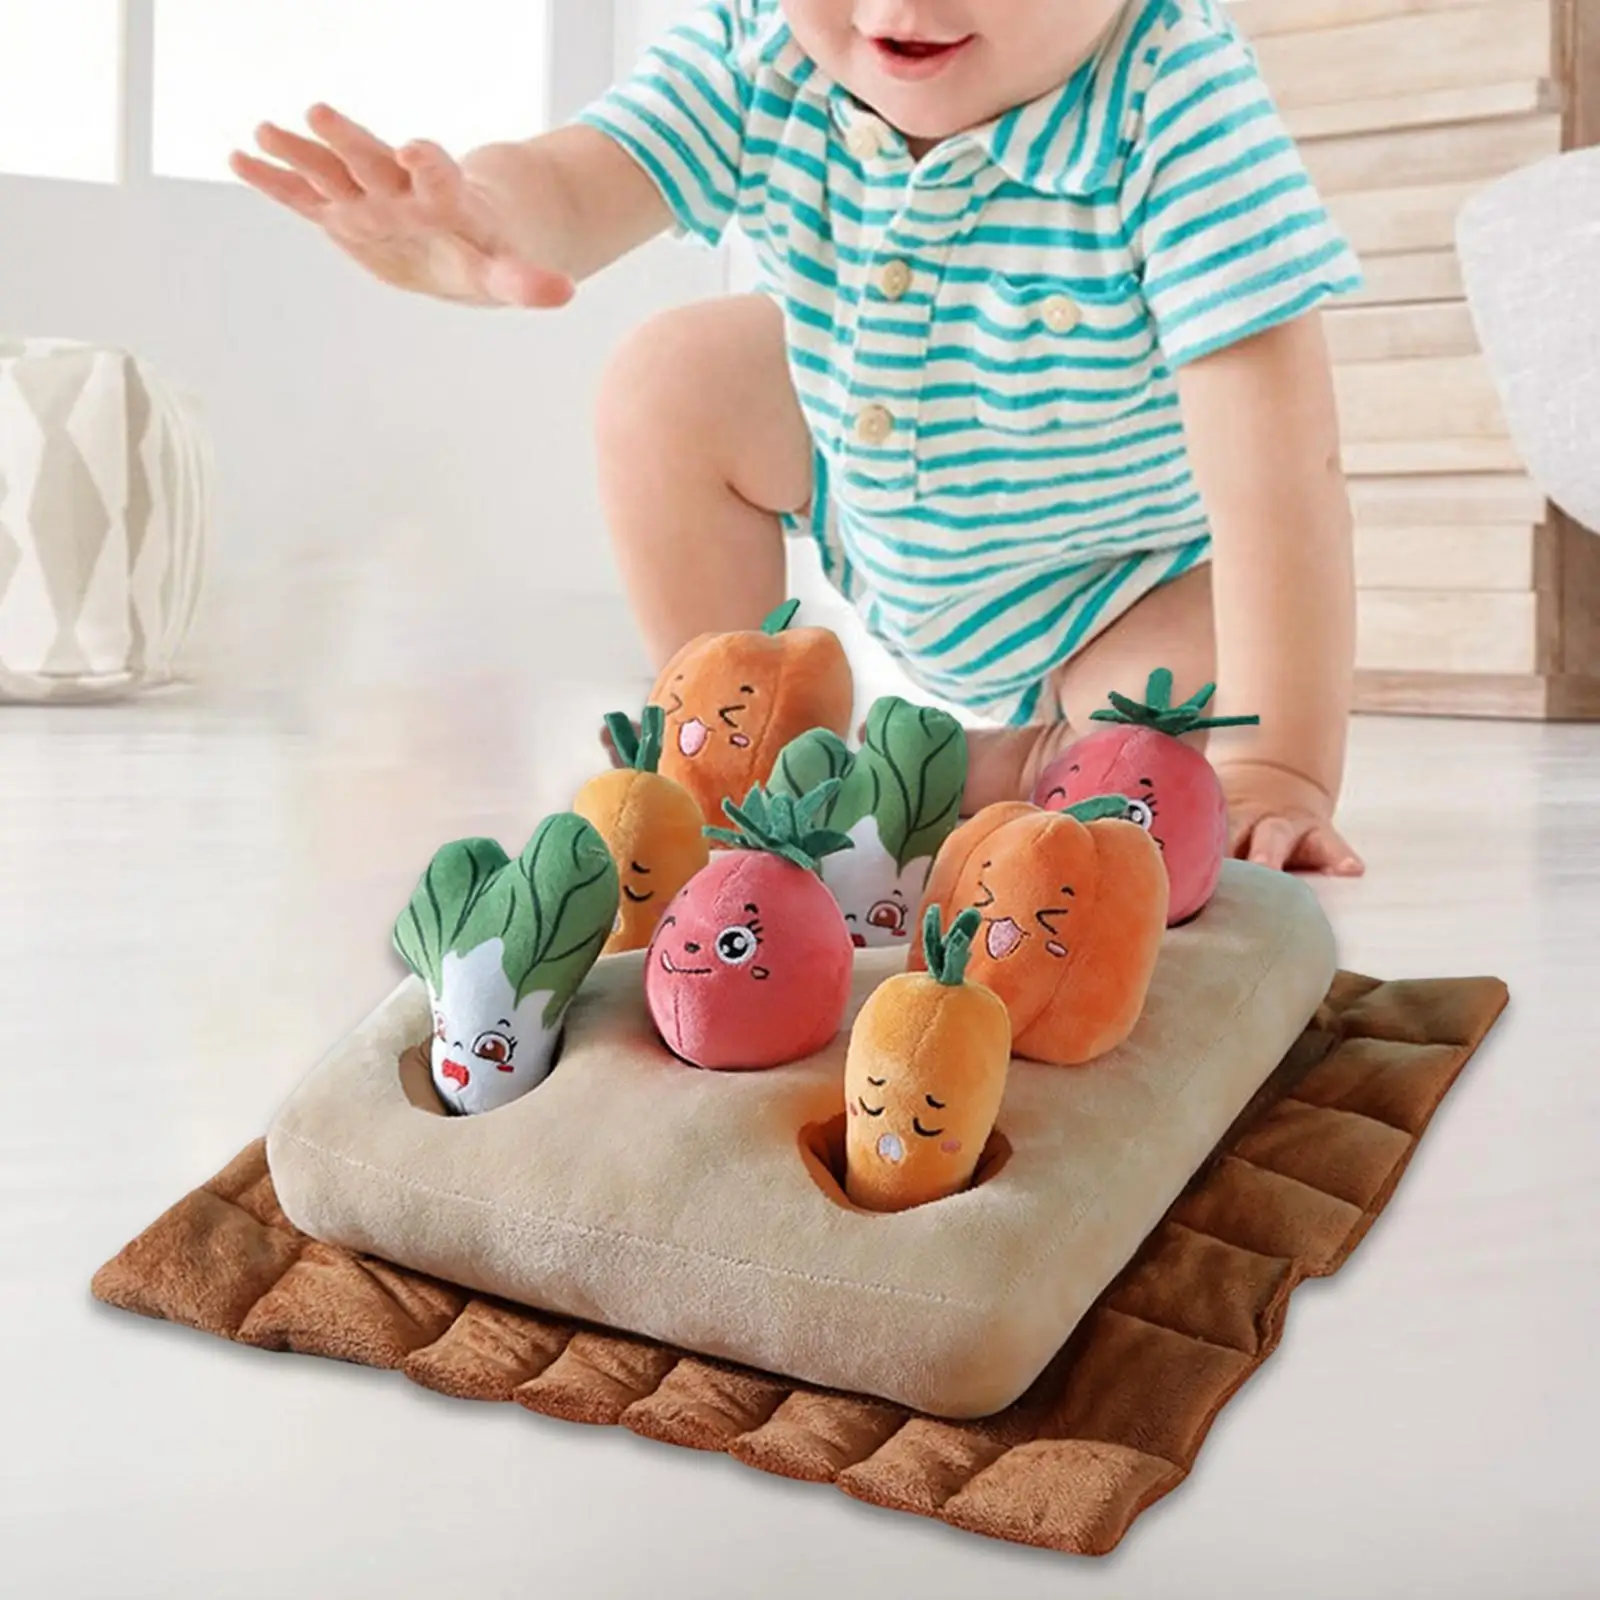 Toddlers Montessori Toys Vegetable Plush Toy Sorting Game Accessories Cute Shape Design